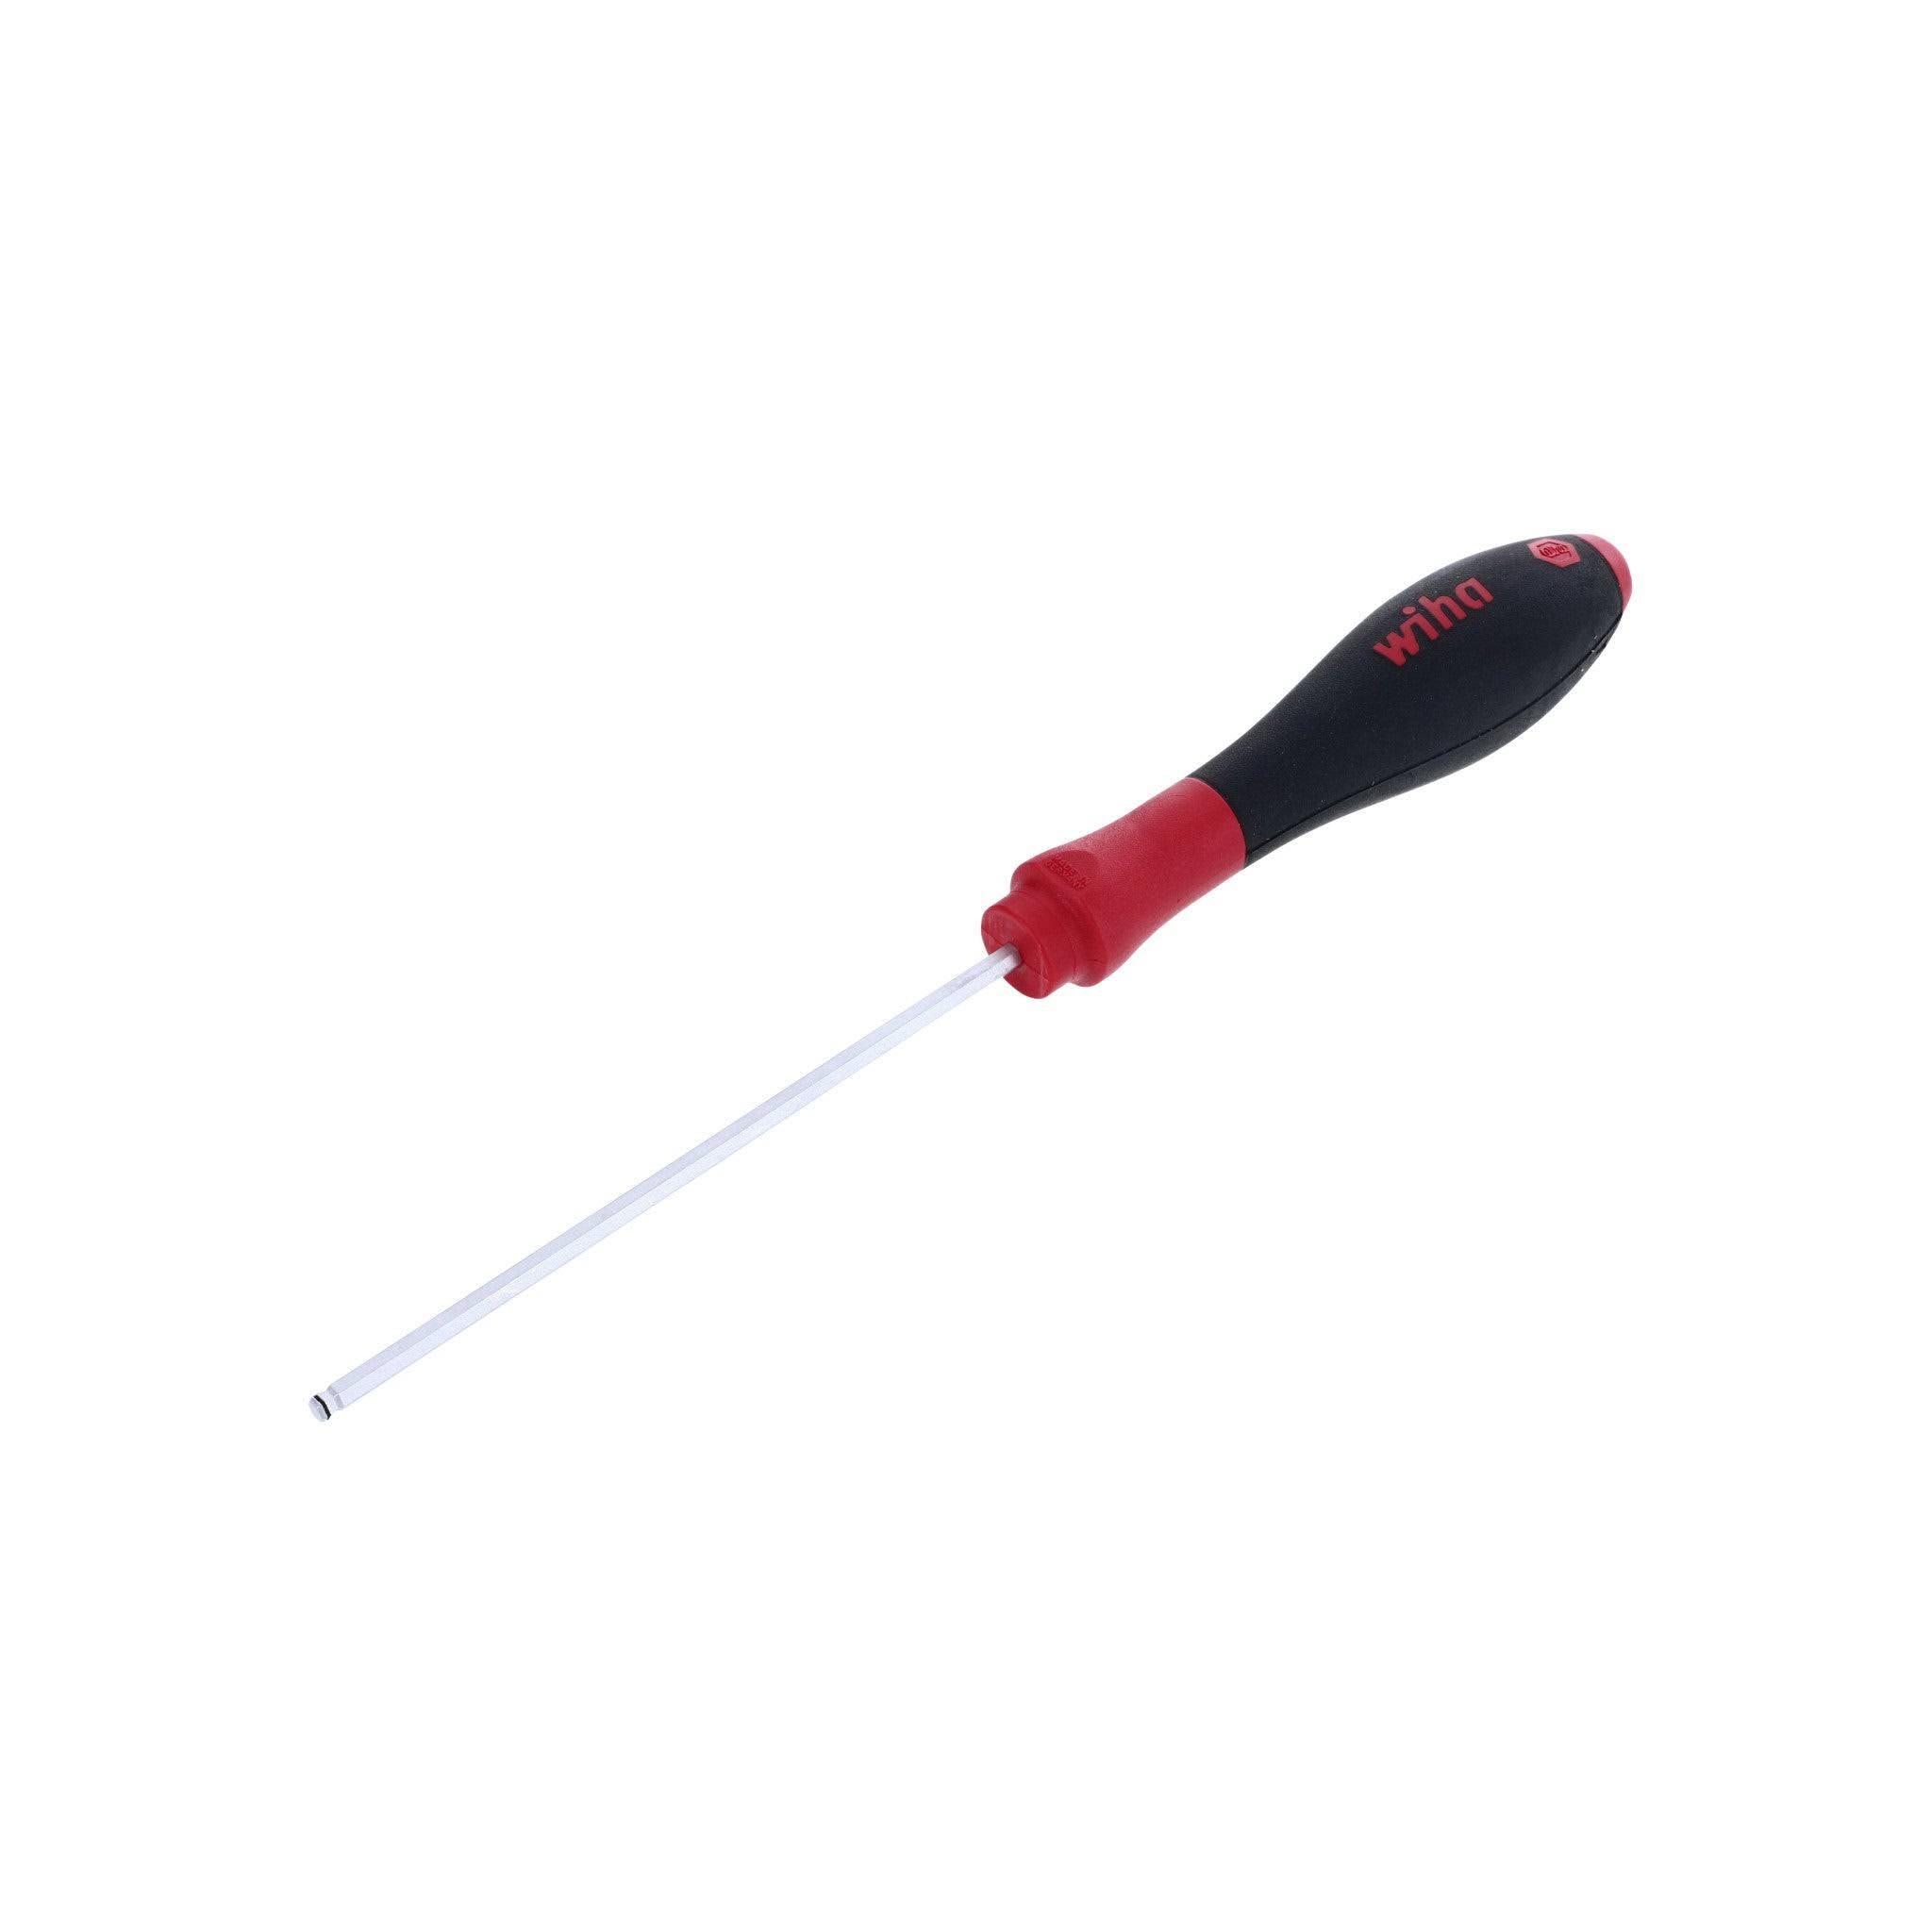 High Performance MagicRing Ball End Driver for Precise Screwholding | Image